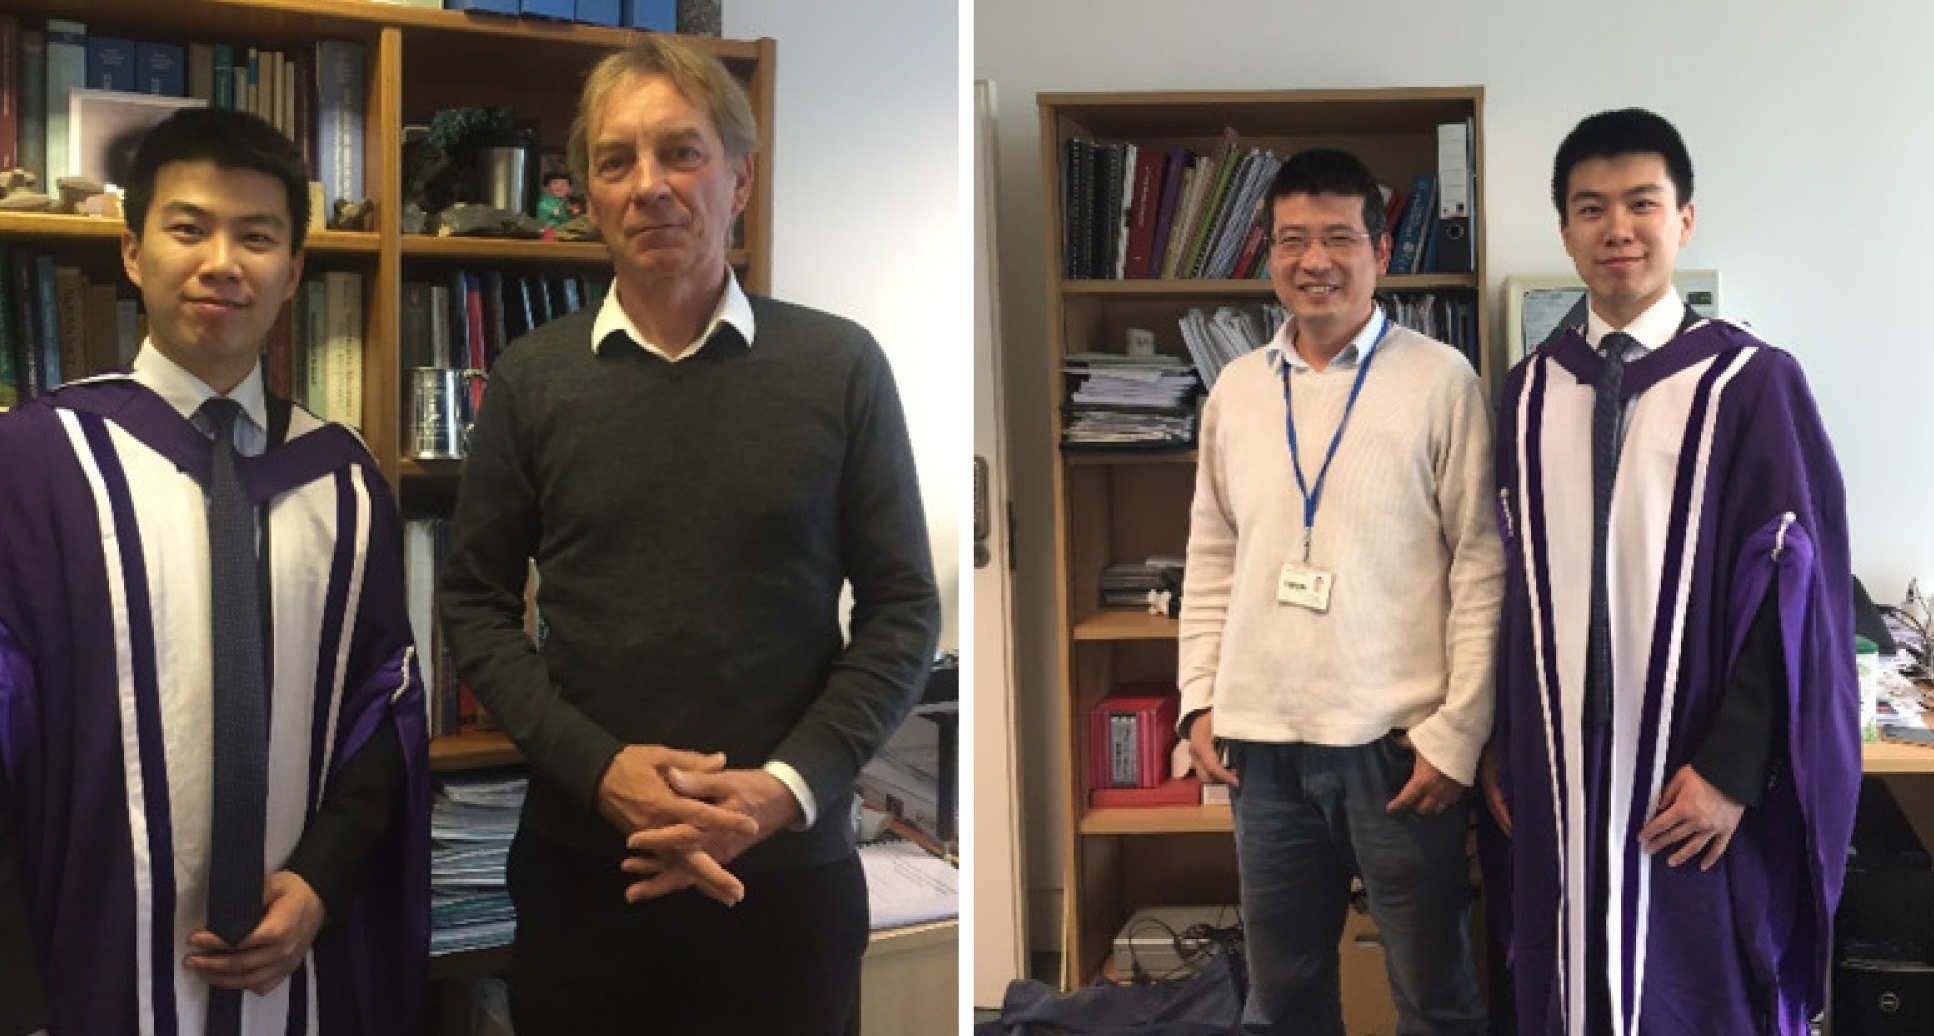 Dr. Qinghua Lei with his PhD supervisors: (left) with Dr. John-Paul Latham; (right) with Dr. Jiansheng Xiang